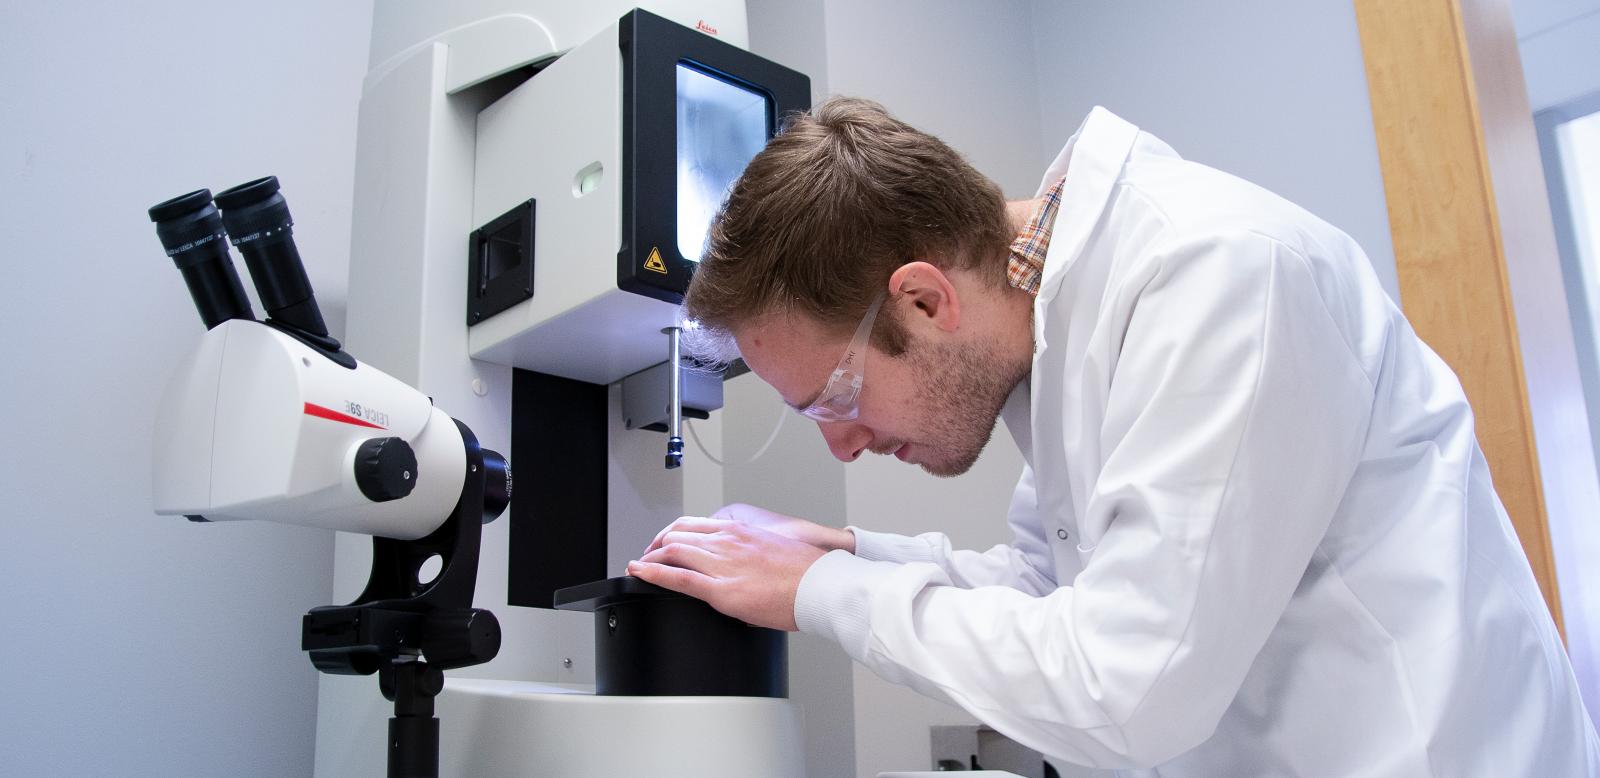 A researcher works at the cryo-confocal microscope